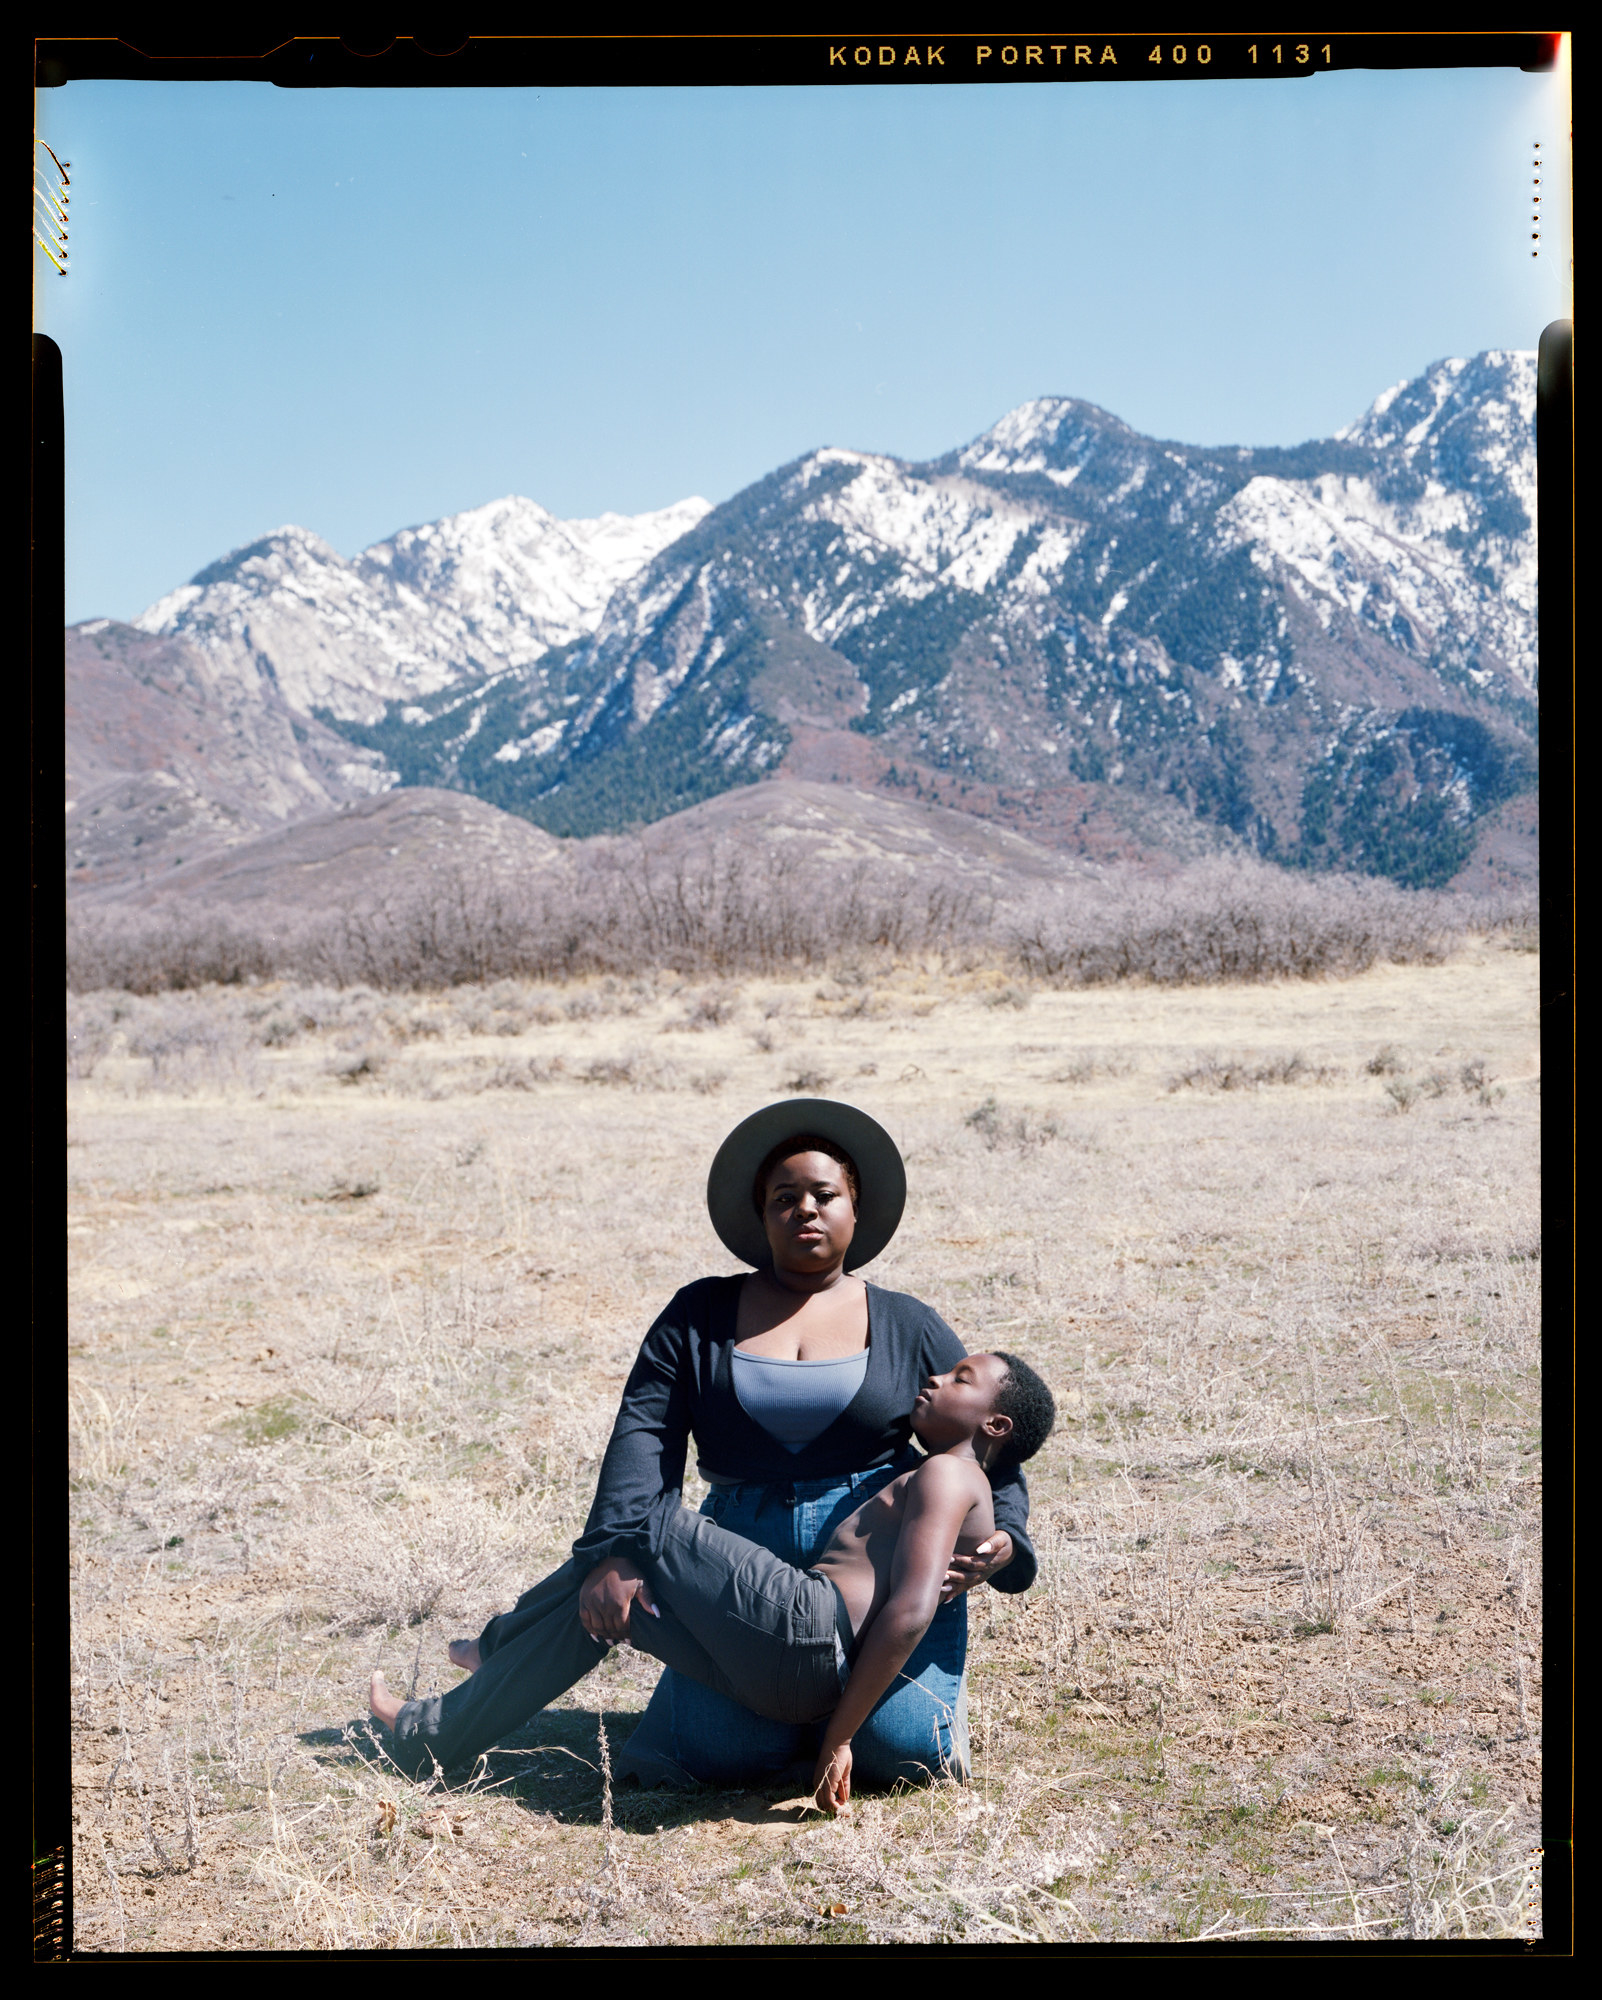 A mother holds a young son in a field in front of a mountain range